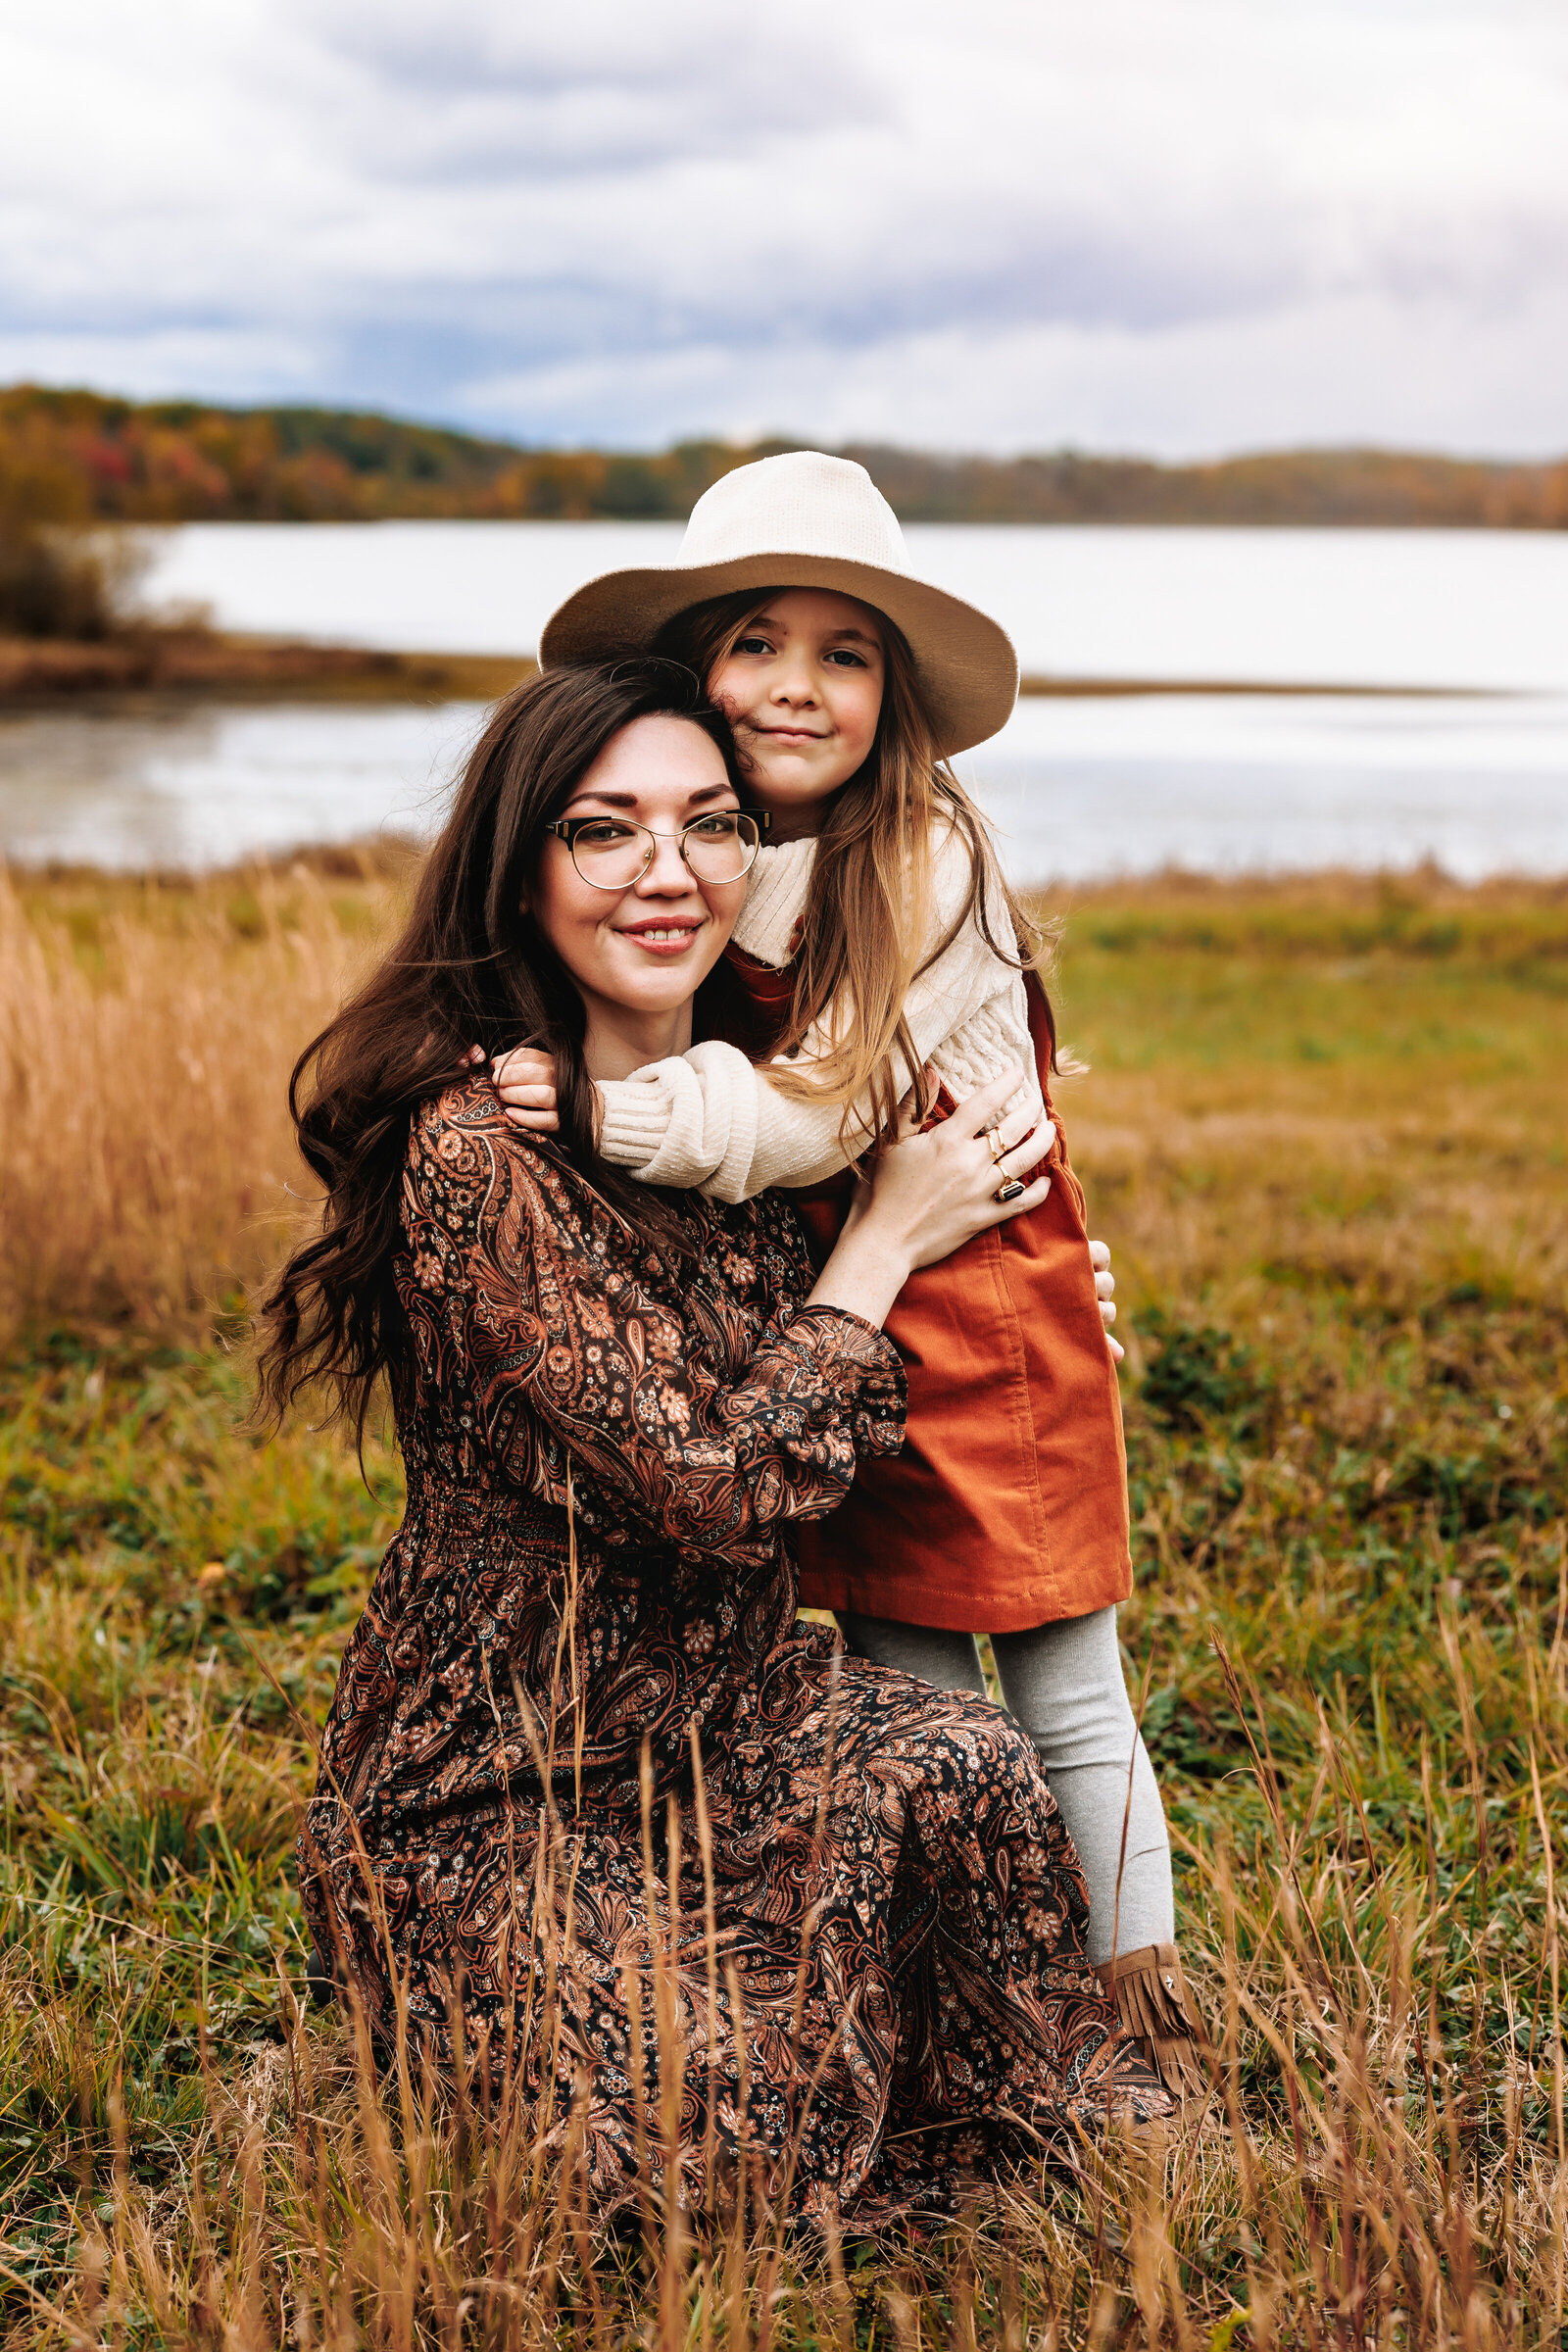 Mother and daughter snuggle up on a warm fall day near a small body of water